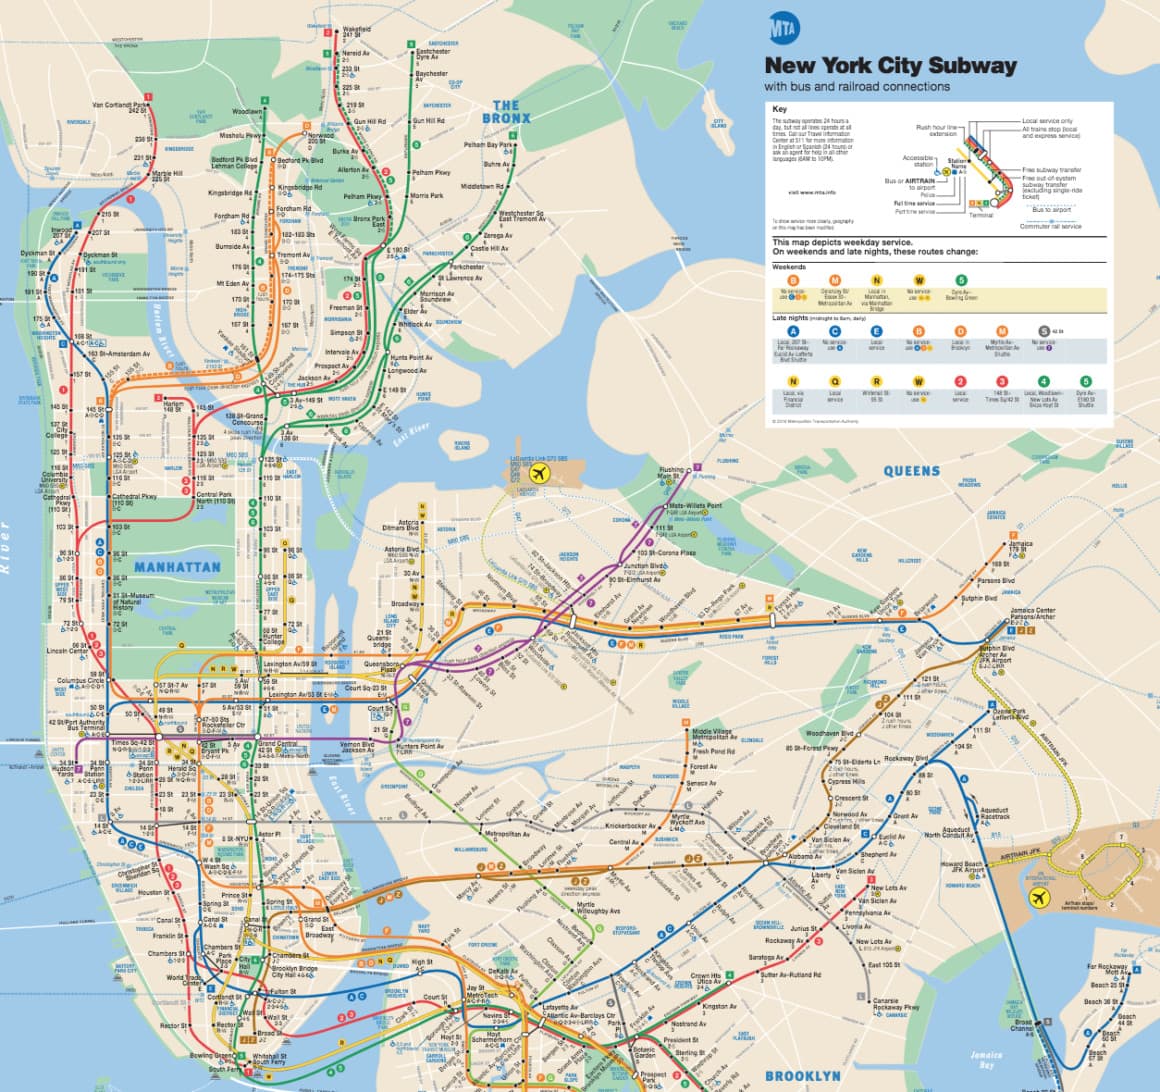 Subway Closures Affecting Housing Prices in NYC